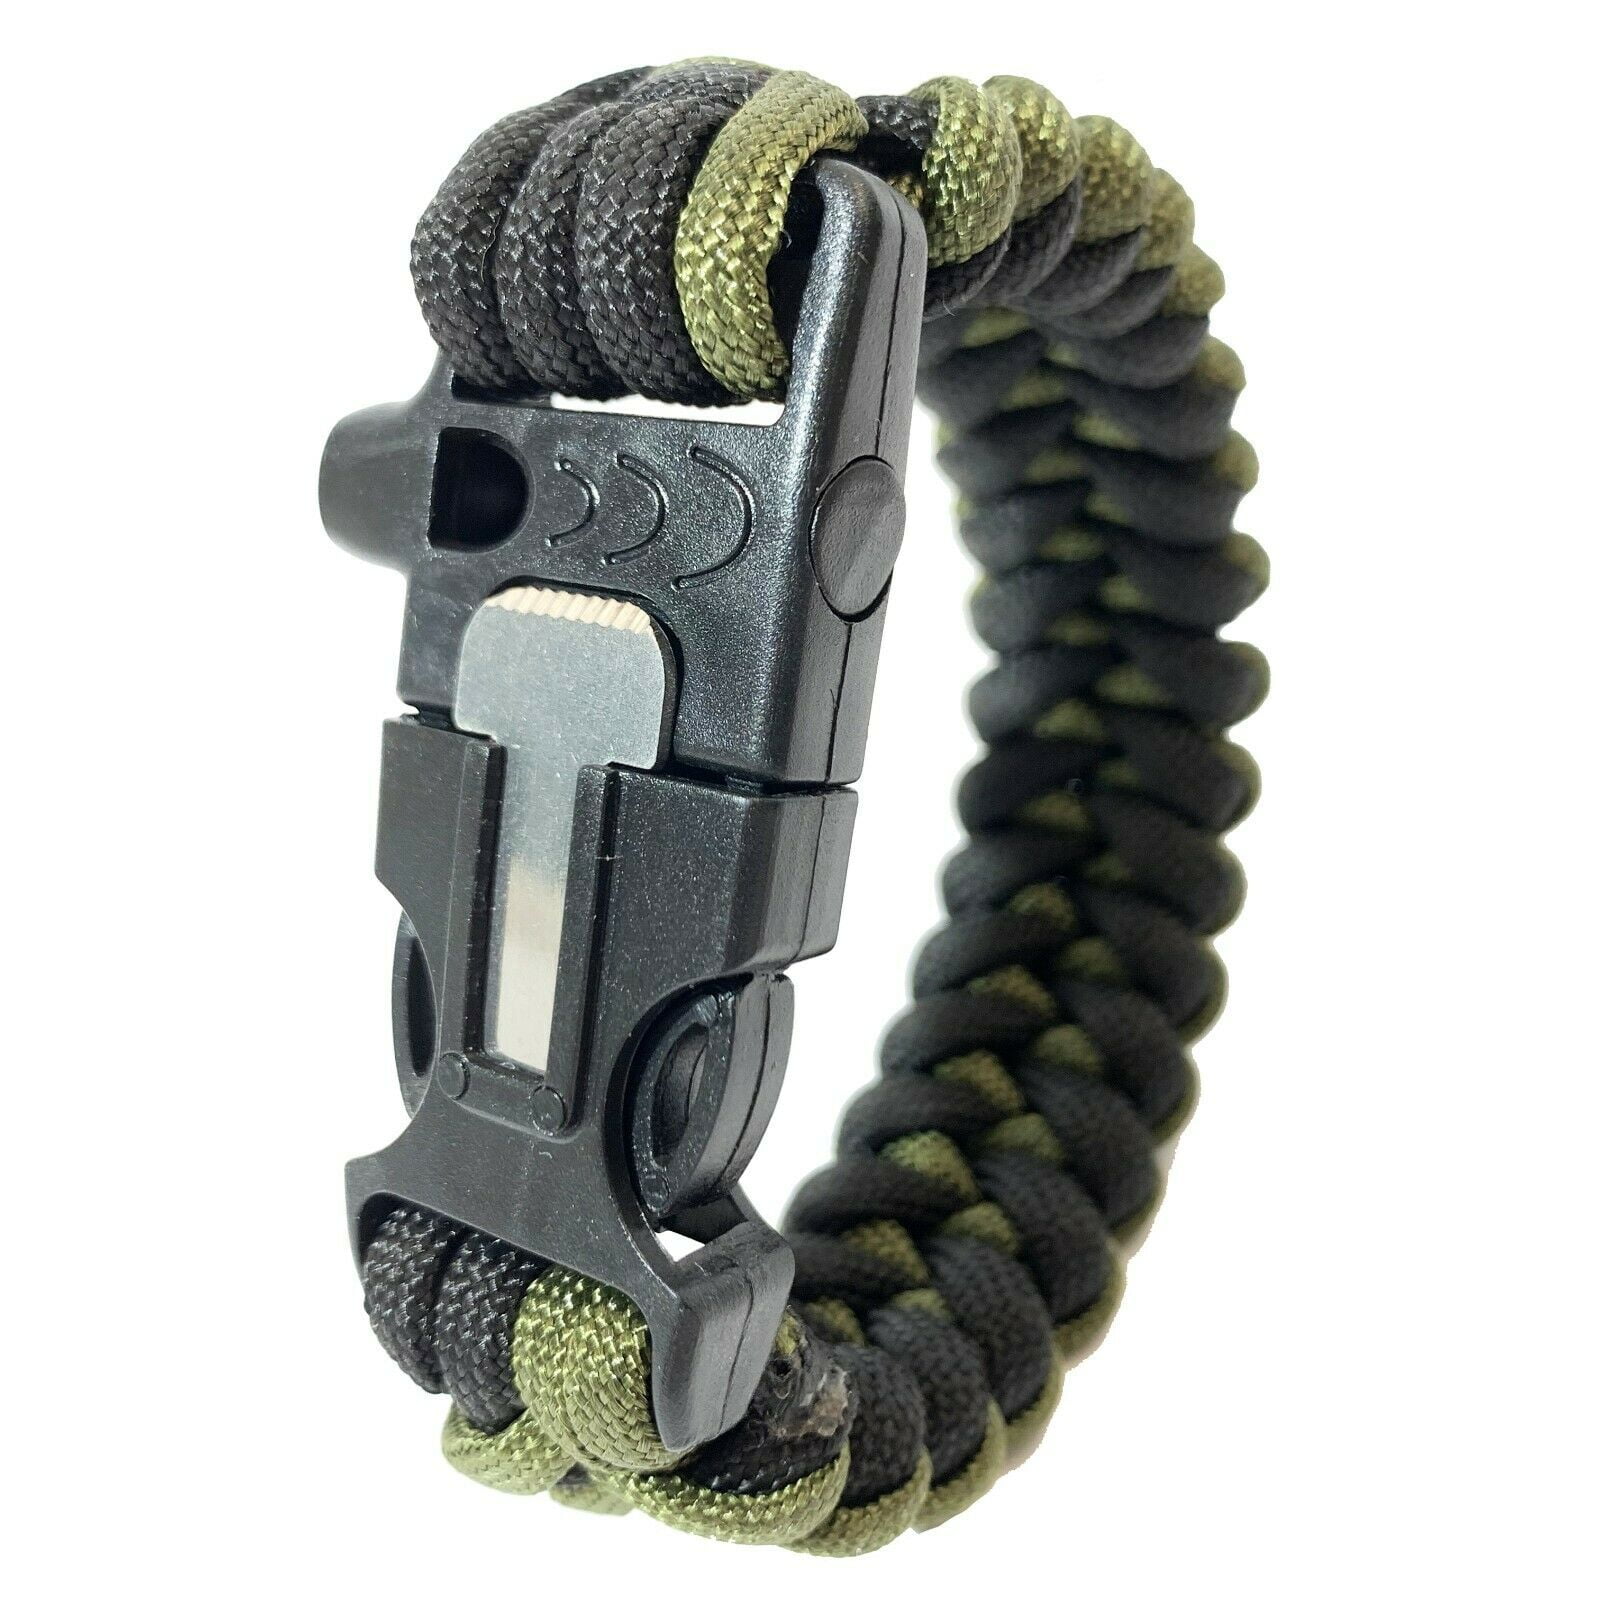 5 in 1 Paracord Survival Bracelets Emergency Sports Wristband Gear kit  with Compress Fire StarterLoud Whistle Umbrella Rope Bracelet for Hiking  Camping Fishing and Hunting  Walmartcom